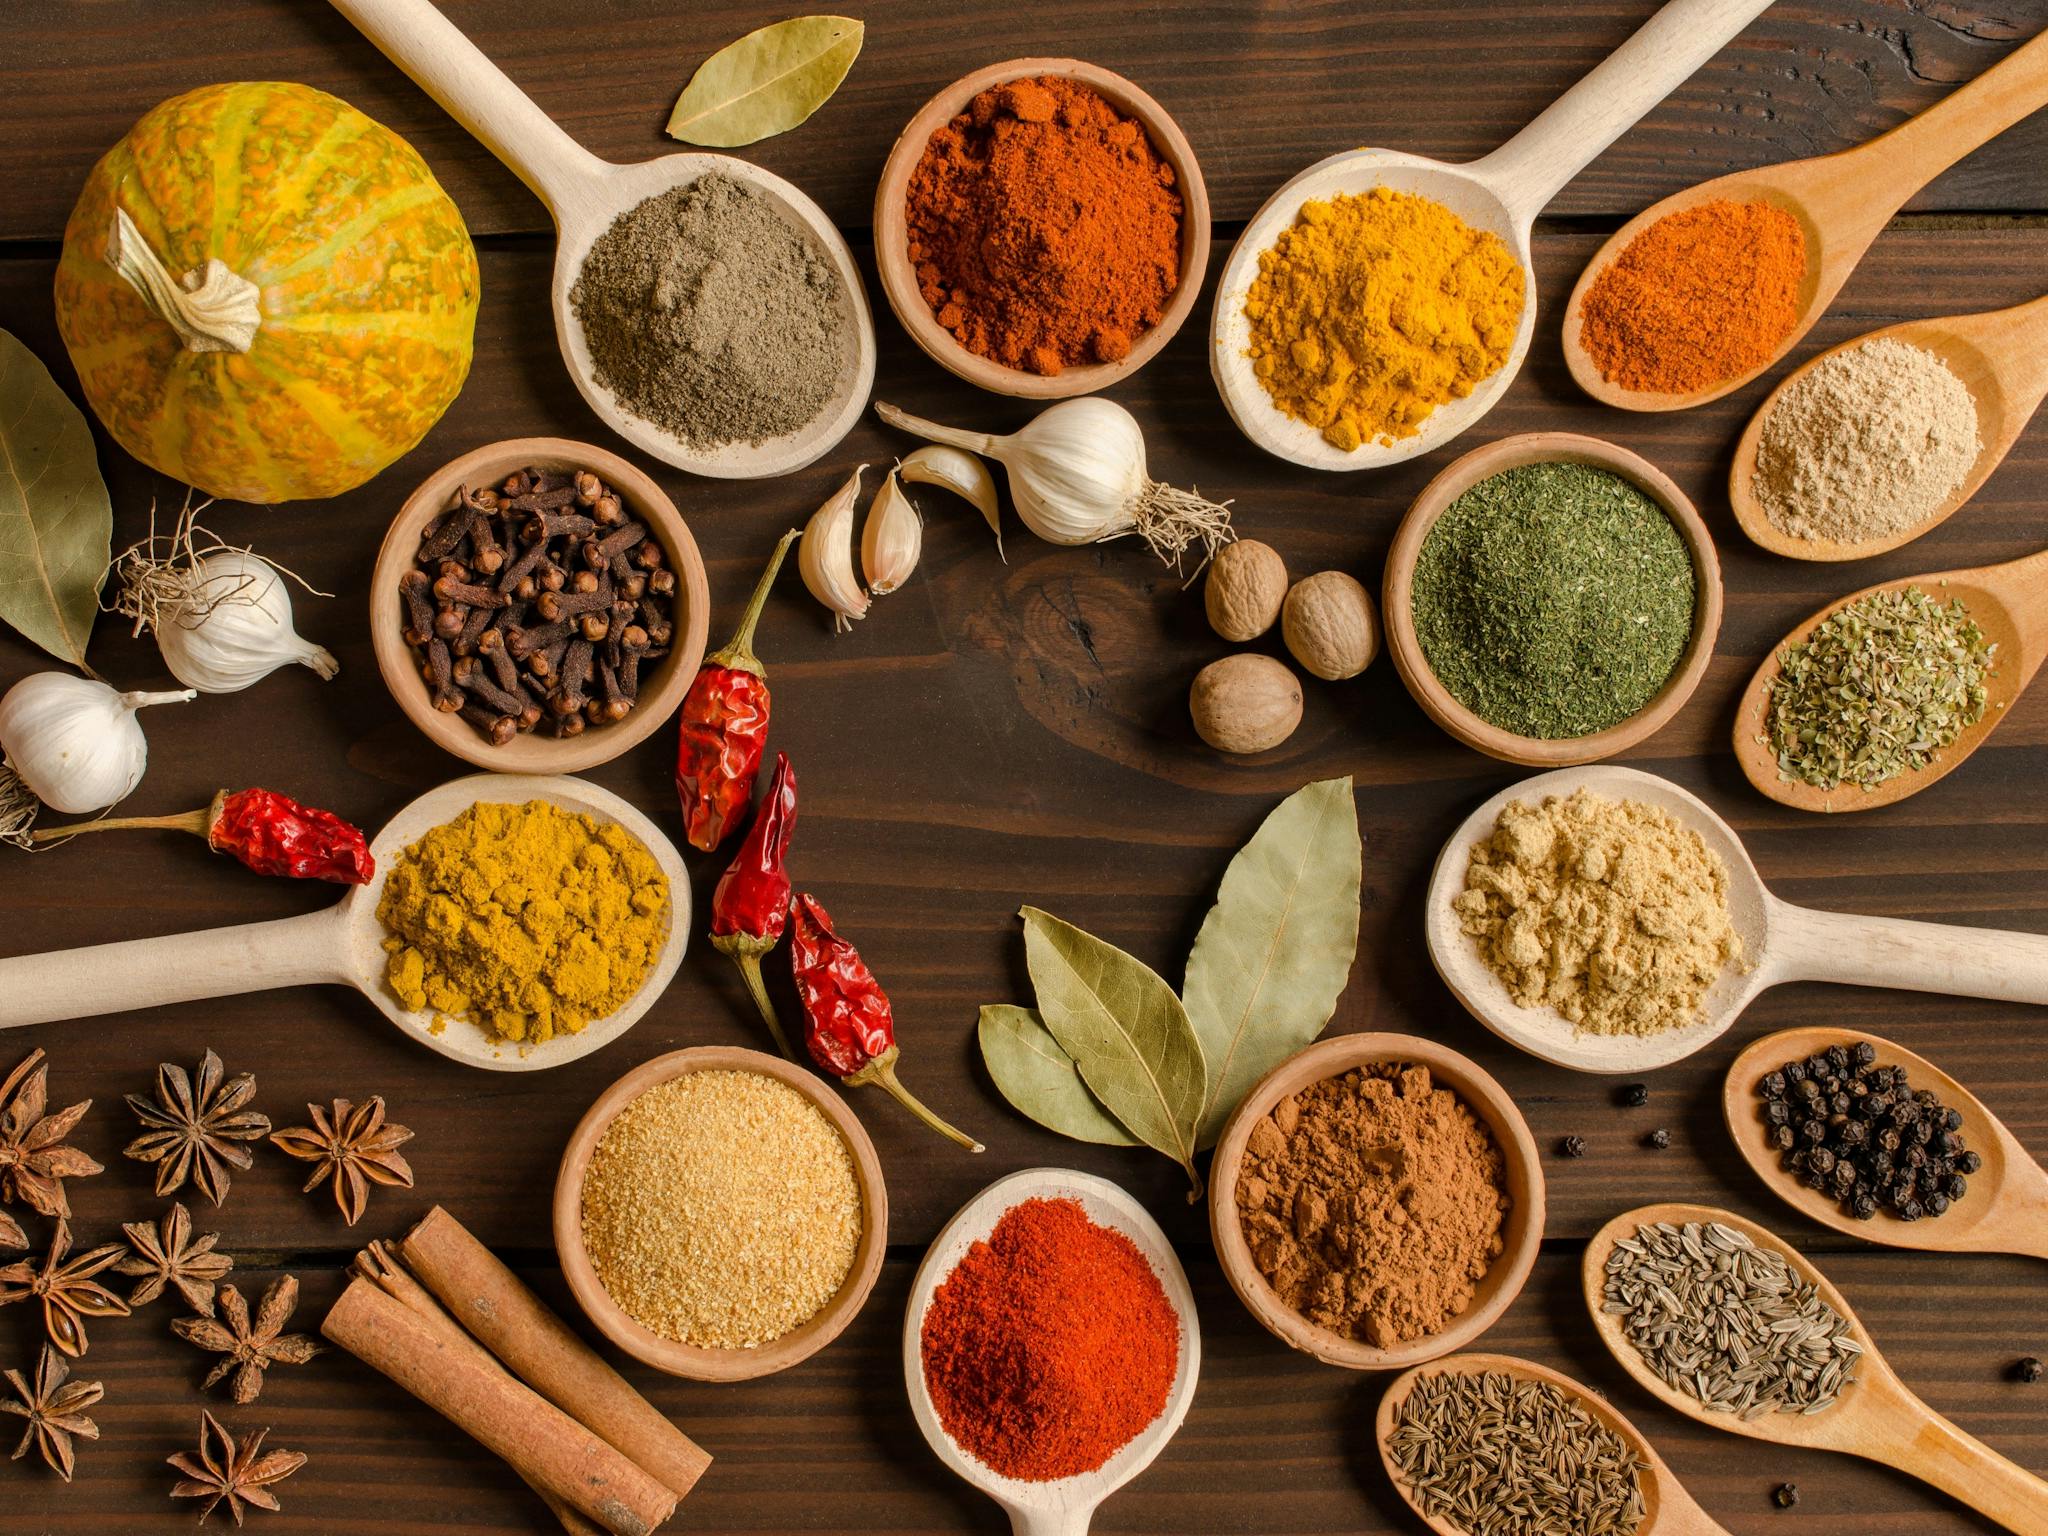 Numerous spices by the spoonful to enhance any meal.